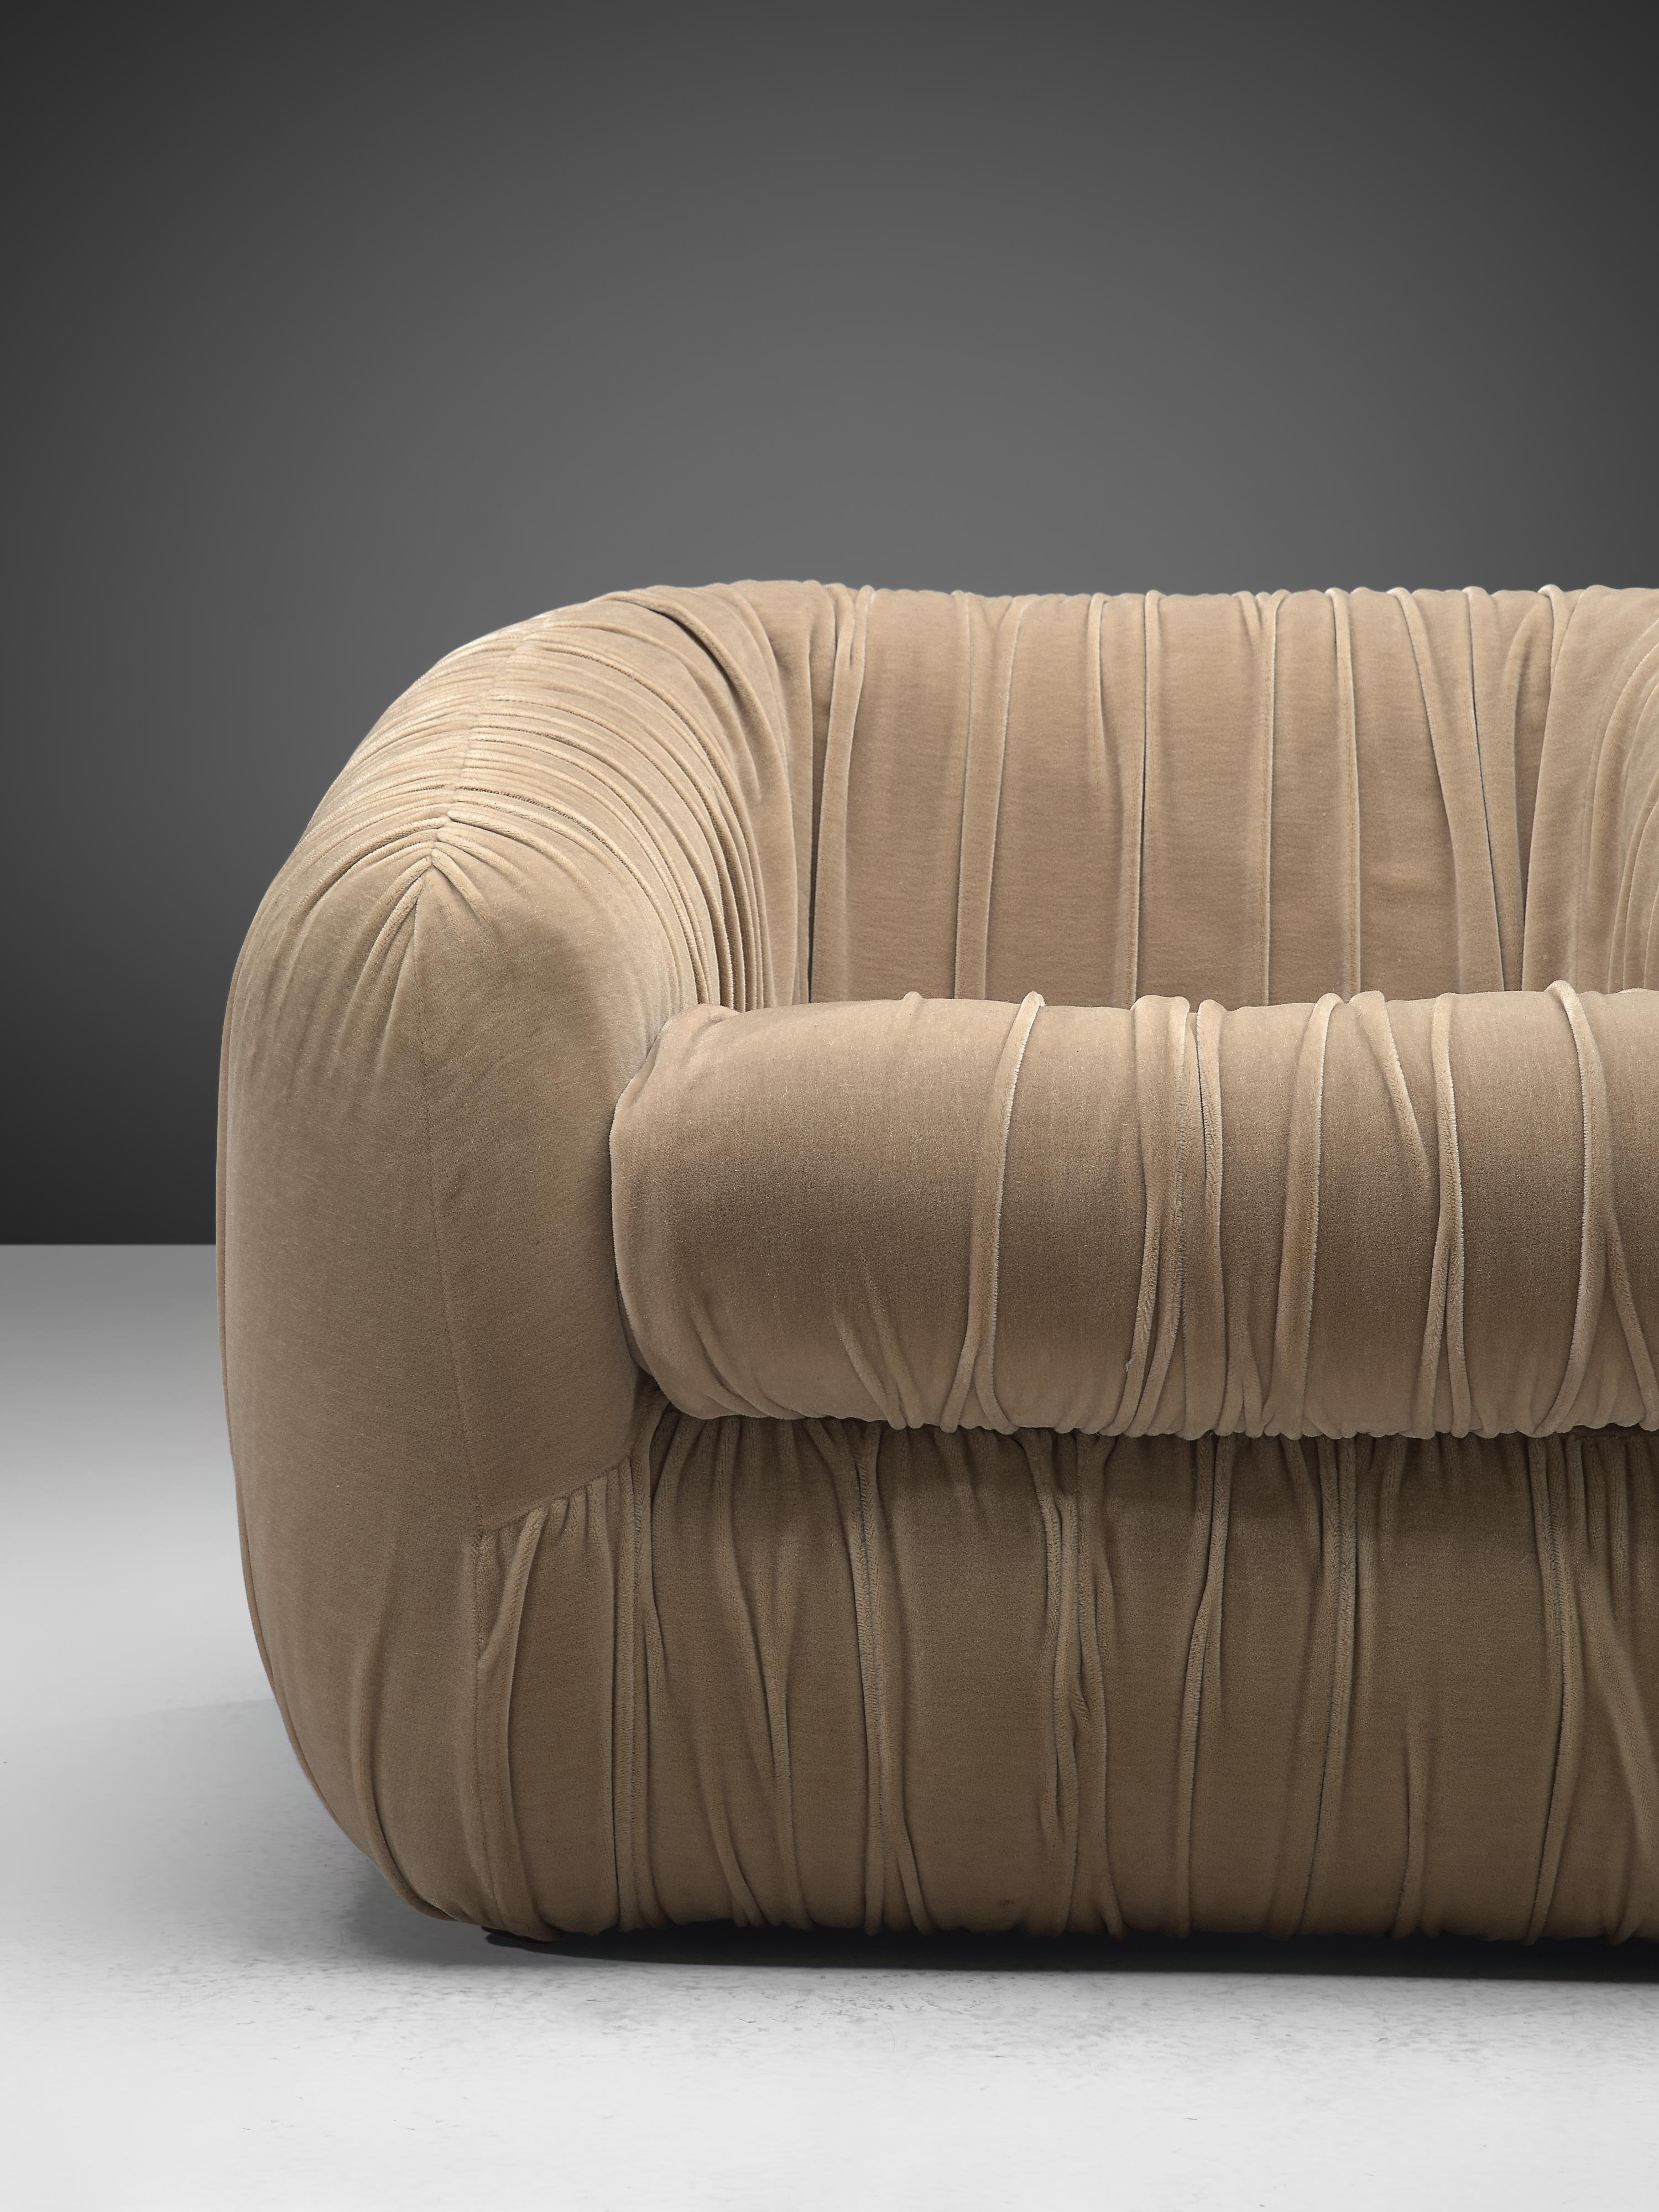 Post-Modern Pair of Bulky Airbone Lounge Chairs in Beige Velvet Upholstery 